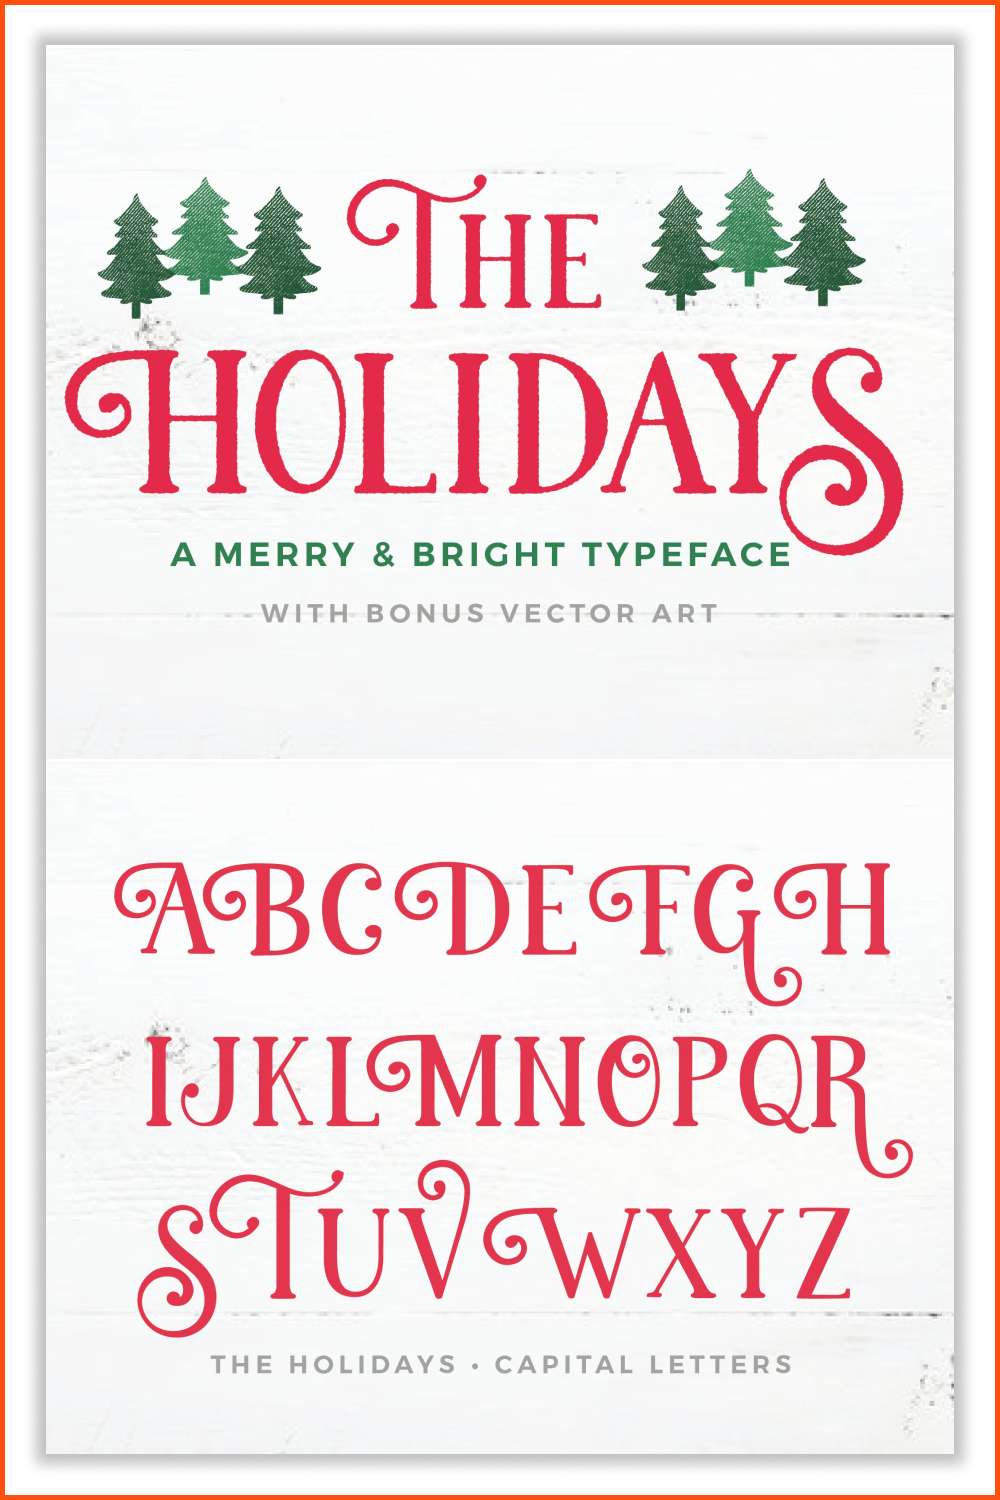 Red alphabet and text on a white background with green painted Christmas trees.